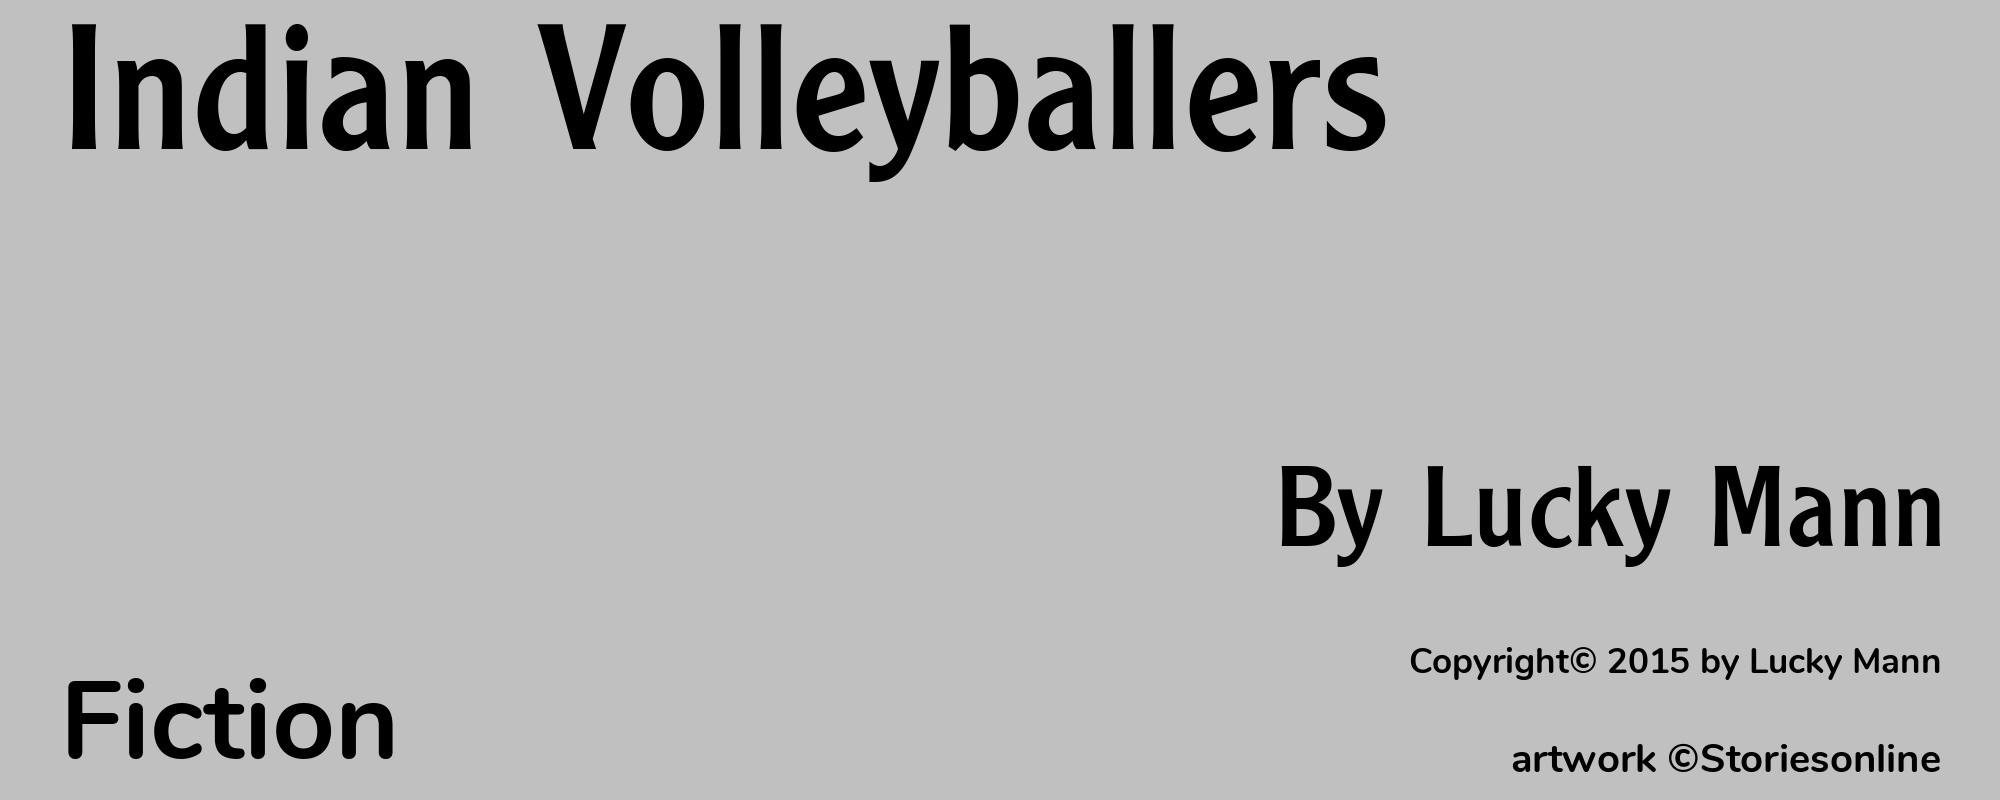 Indian Volleyballers - Cover